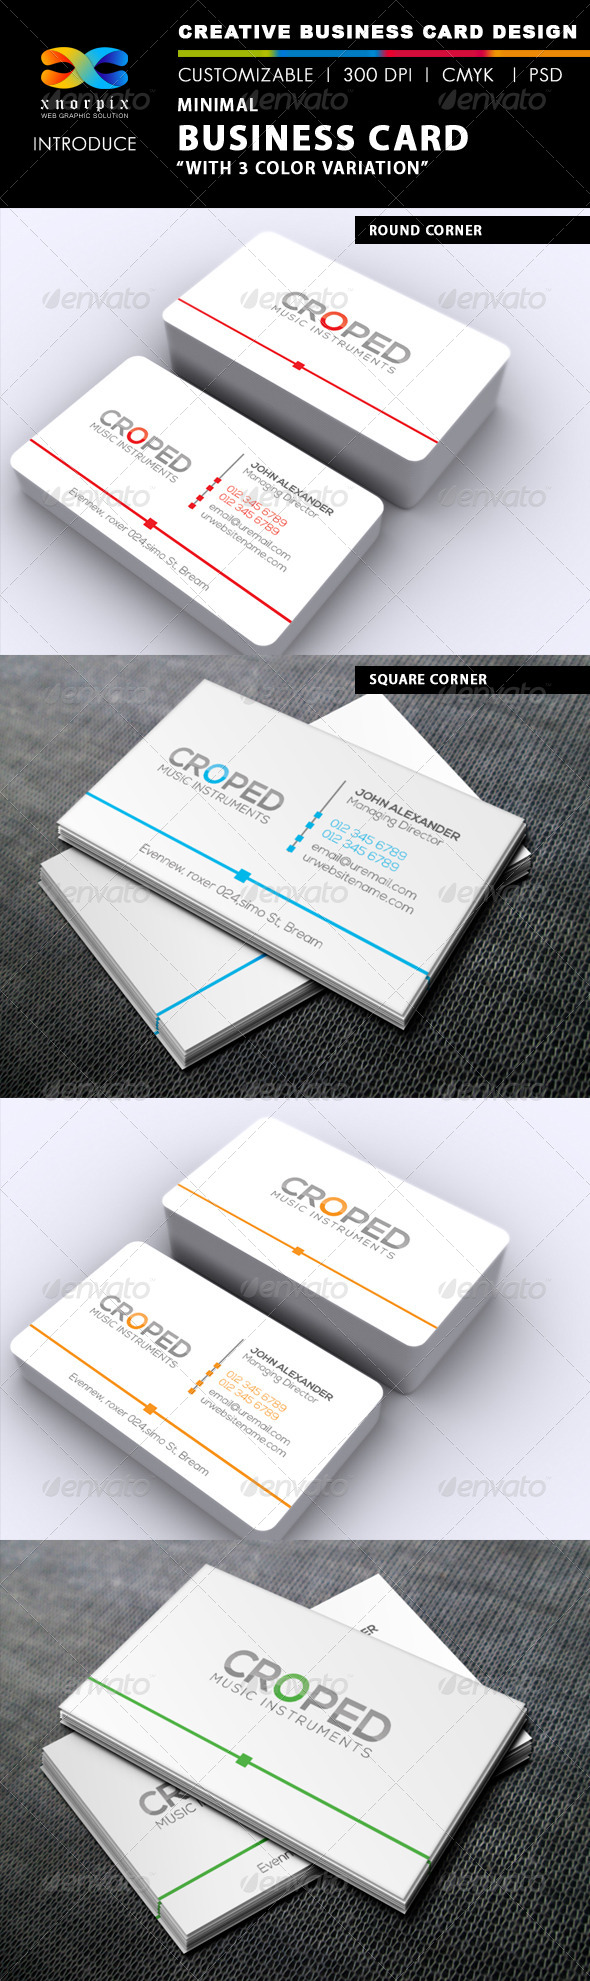 White business card in small envelope. 3d rendering Stock Photo by  ©ekostsov 114128494